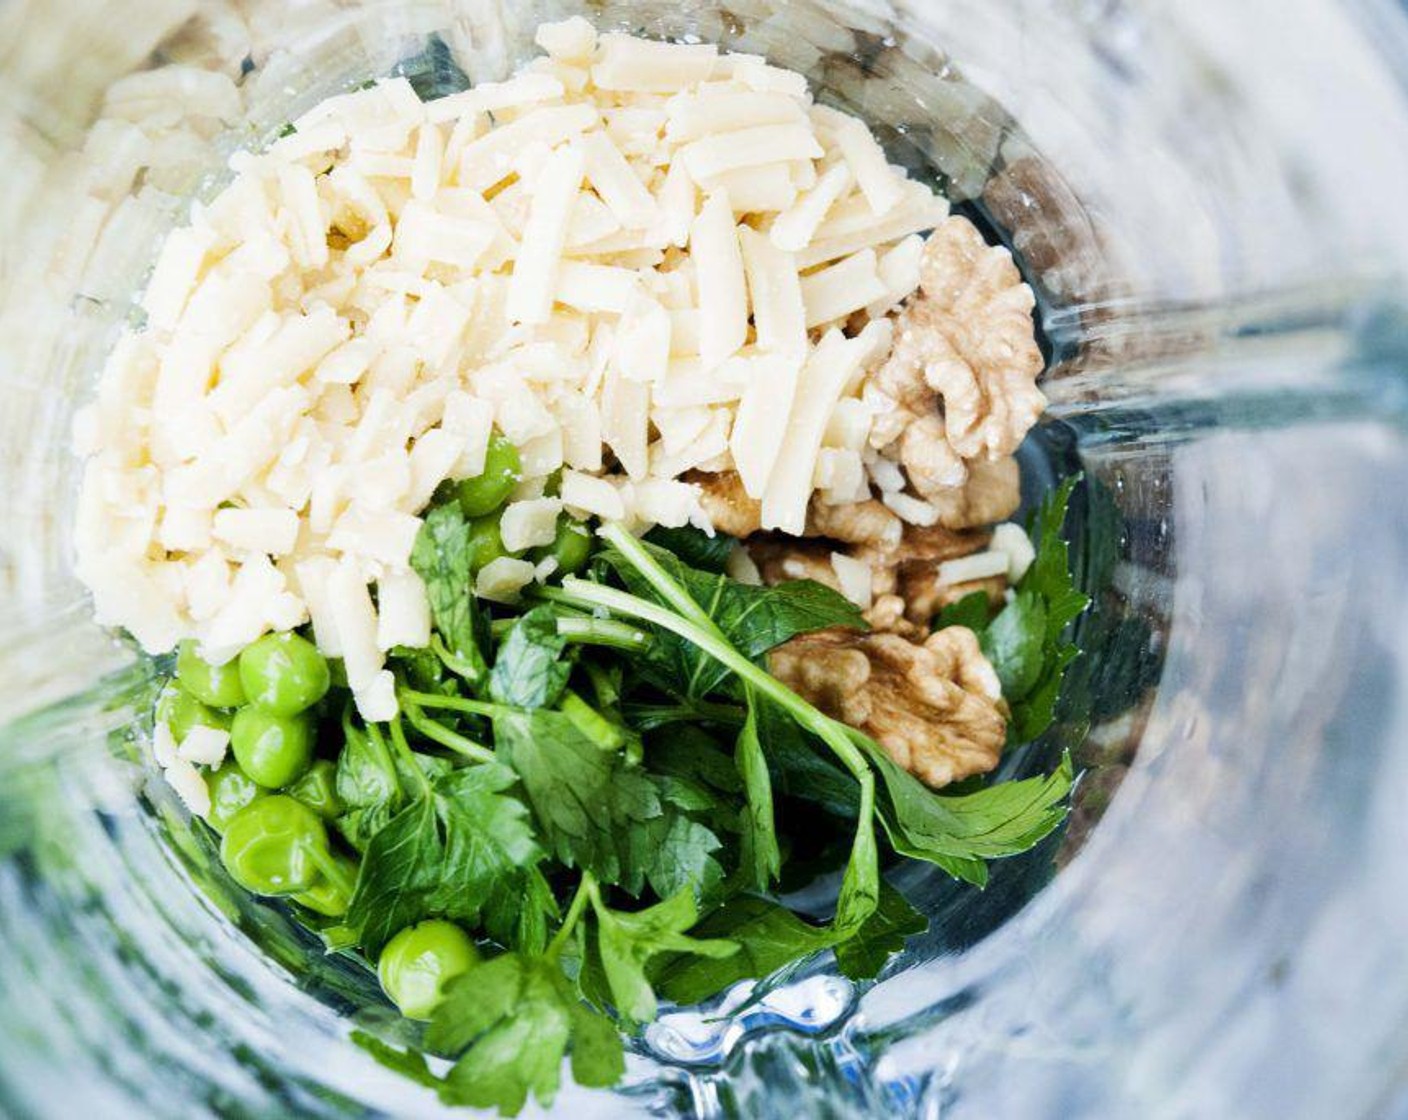 step 1 In a blender or food processor combine Green Peas (1 cup), Fresh Parsley (1/2 cup), Raw Walnuts (1/4 cup), Parmesan Cheese (1/3 cup), Garlic (1 clove), and 2 tablespoons of water. Pulse until paste forms.